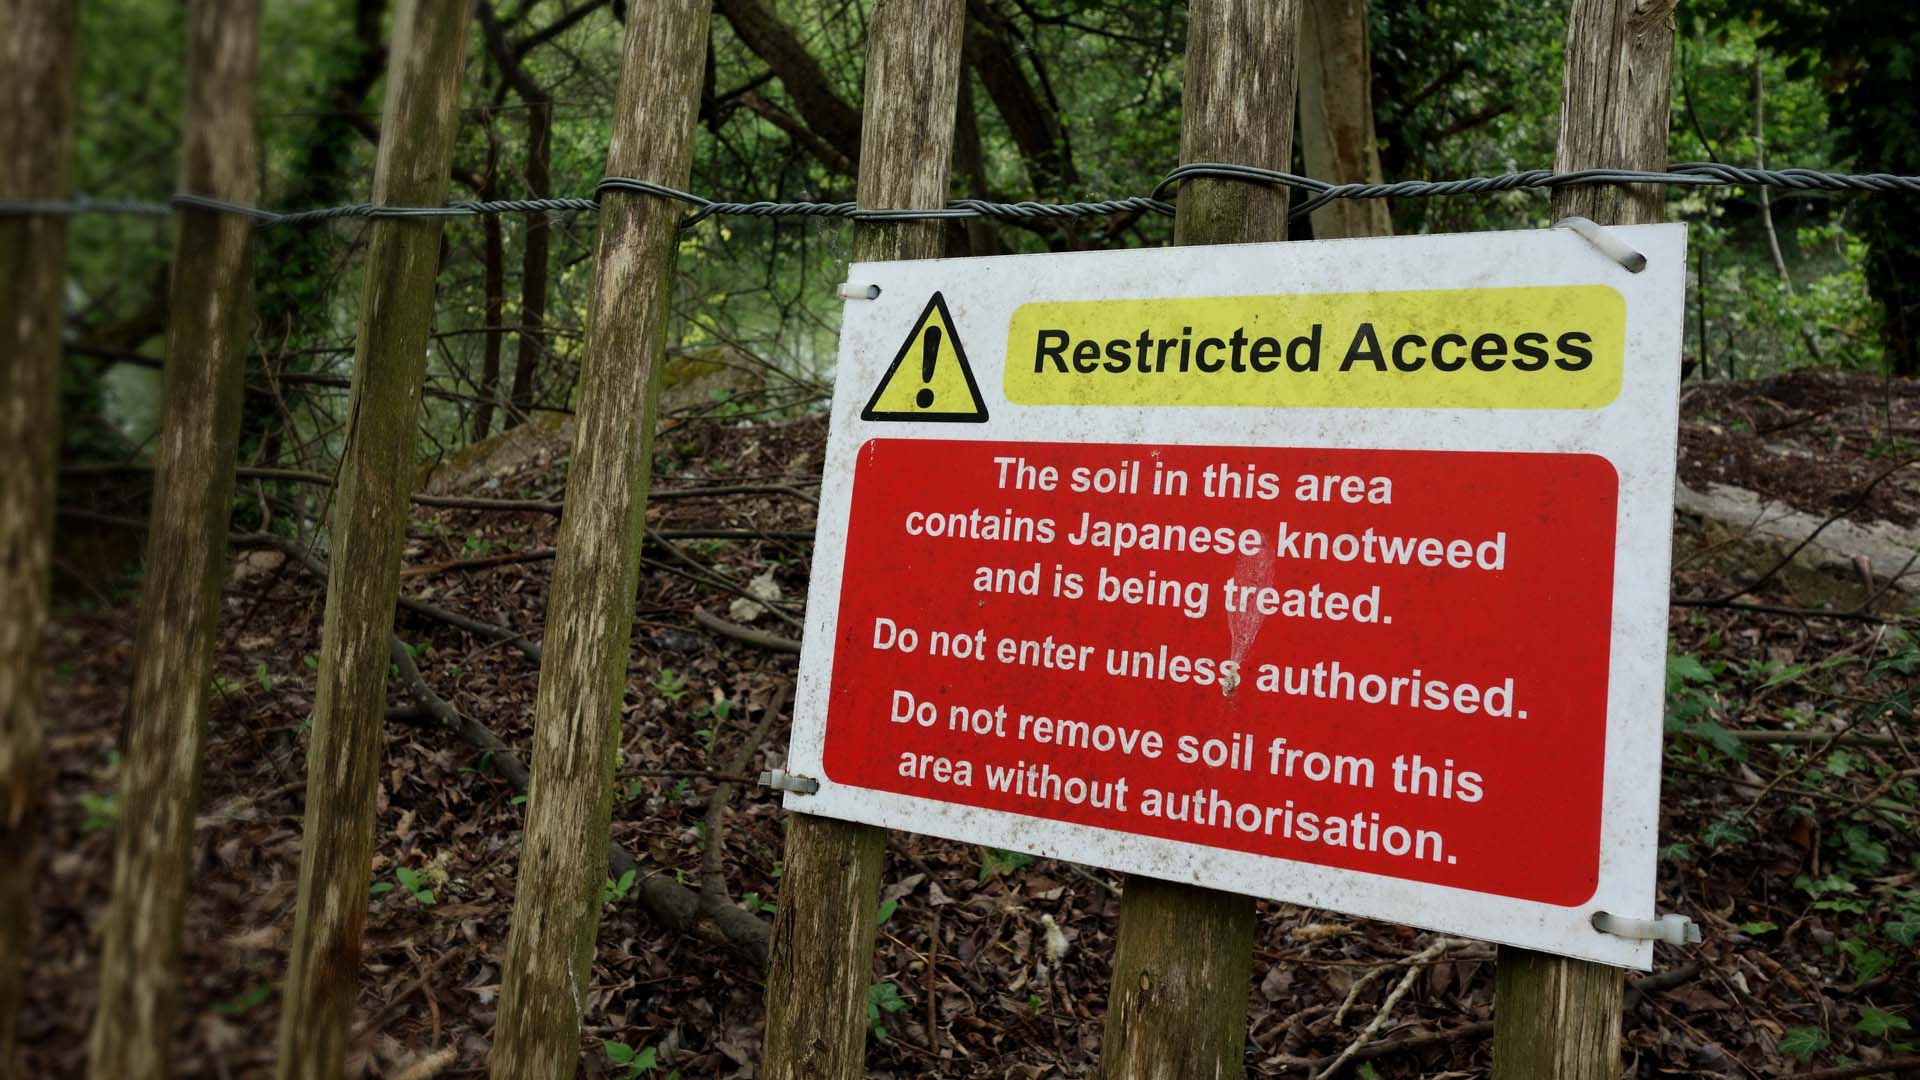 Restricted access warning sign. Focus on sign, one side of frame. The soil in this area contain Japanese Knotweed being treated. Do not enter unless authorised - Do not remove soil without authorisation